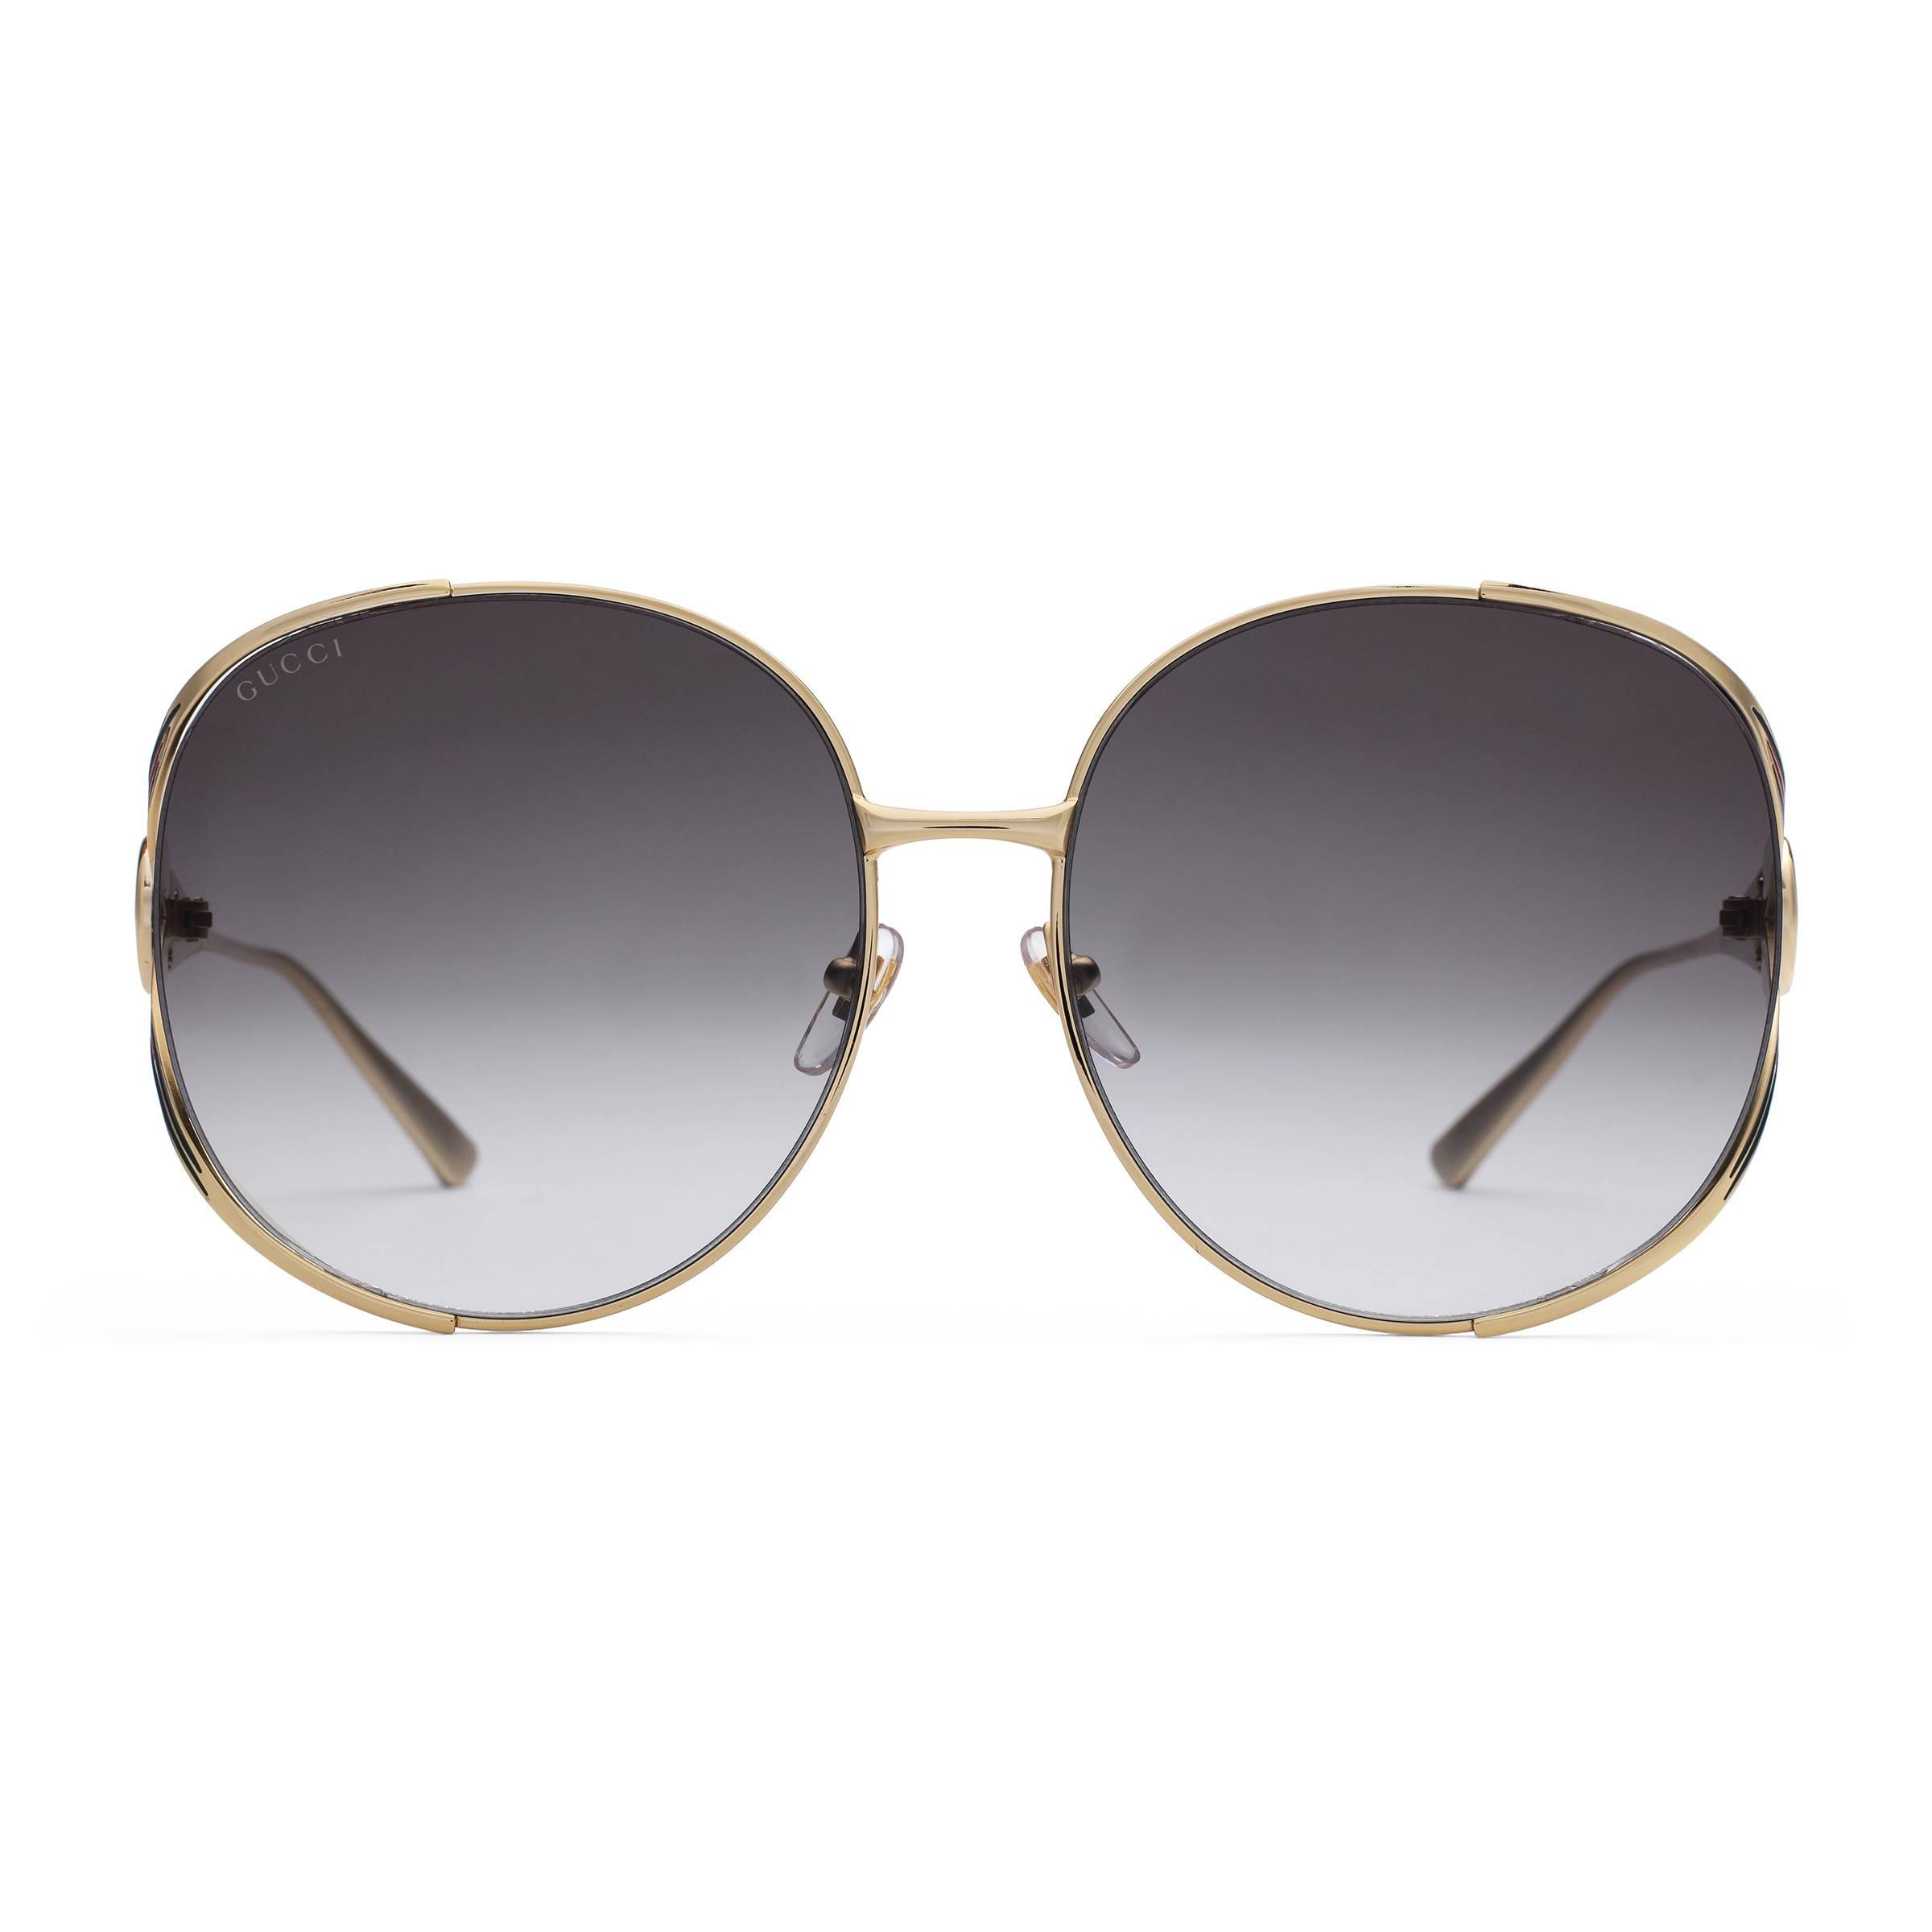 Gucci Rubber Round-frame Metal Sunglasses in Gold (Metallic) - Lyst